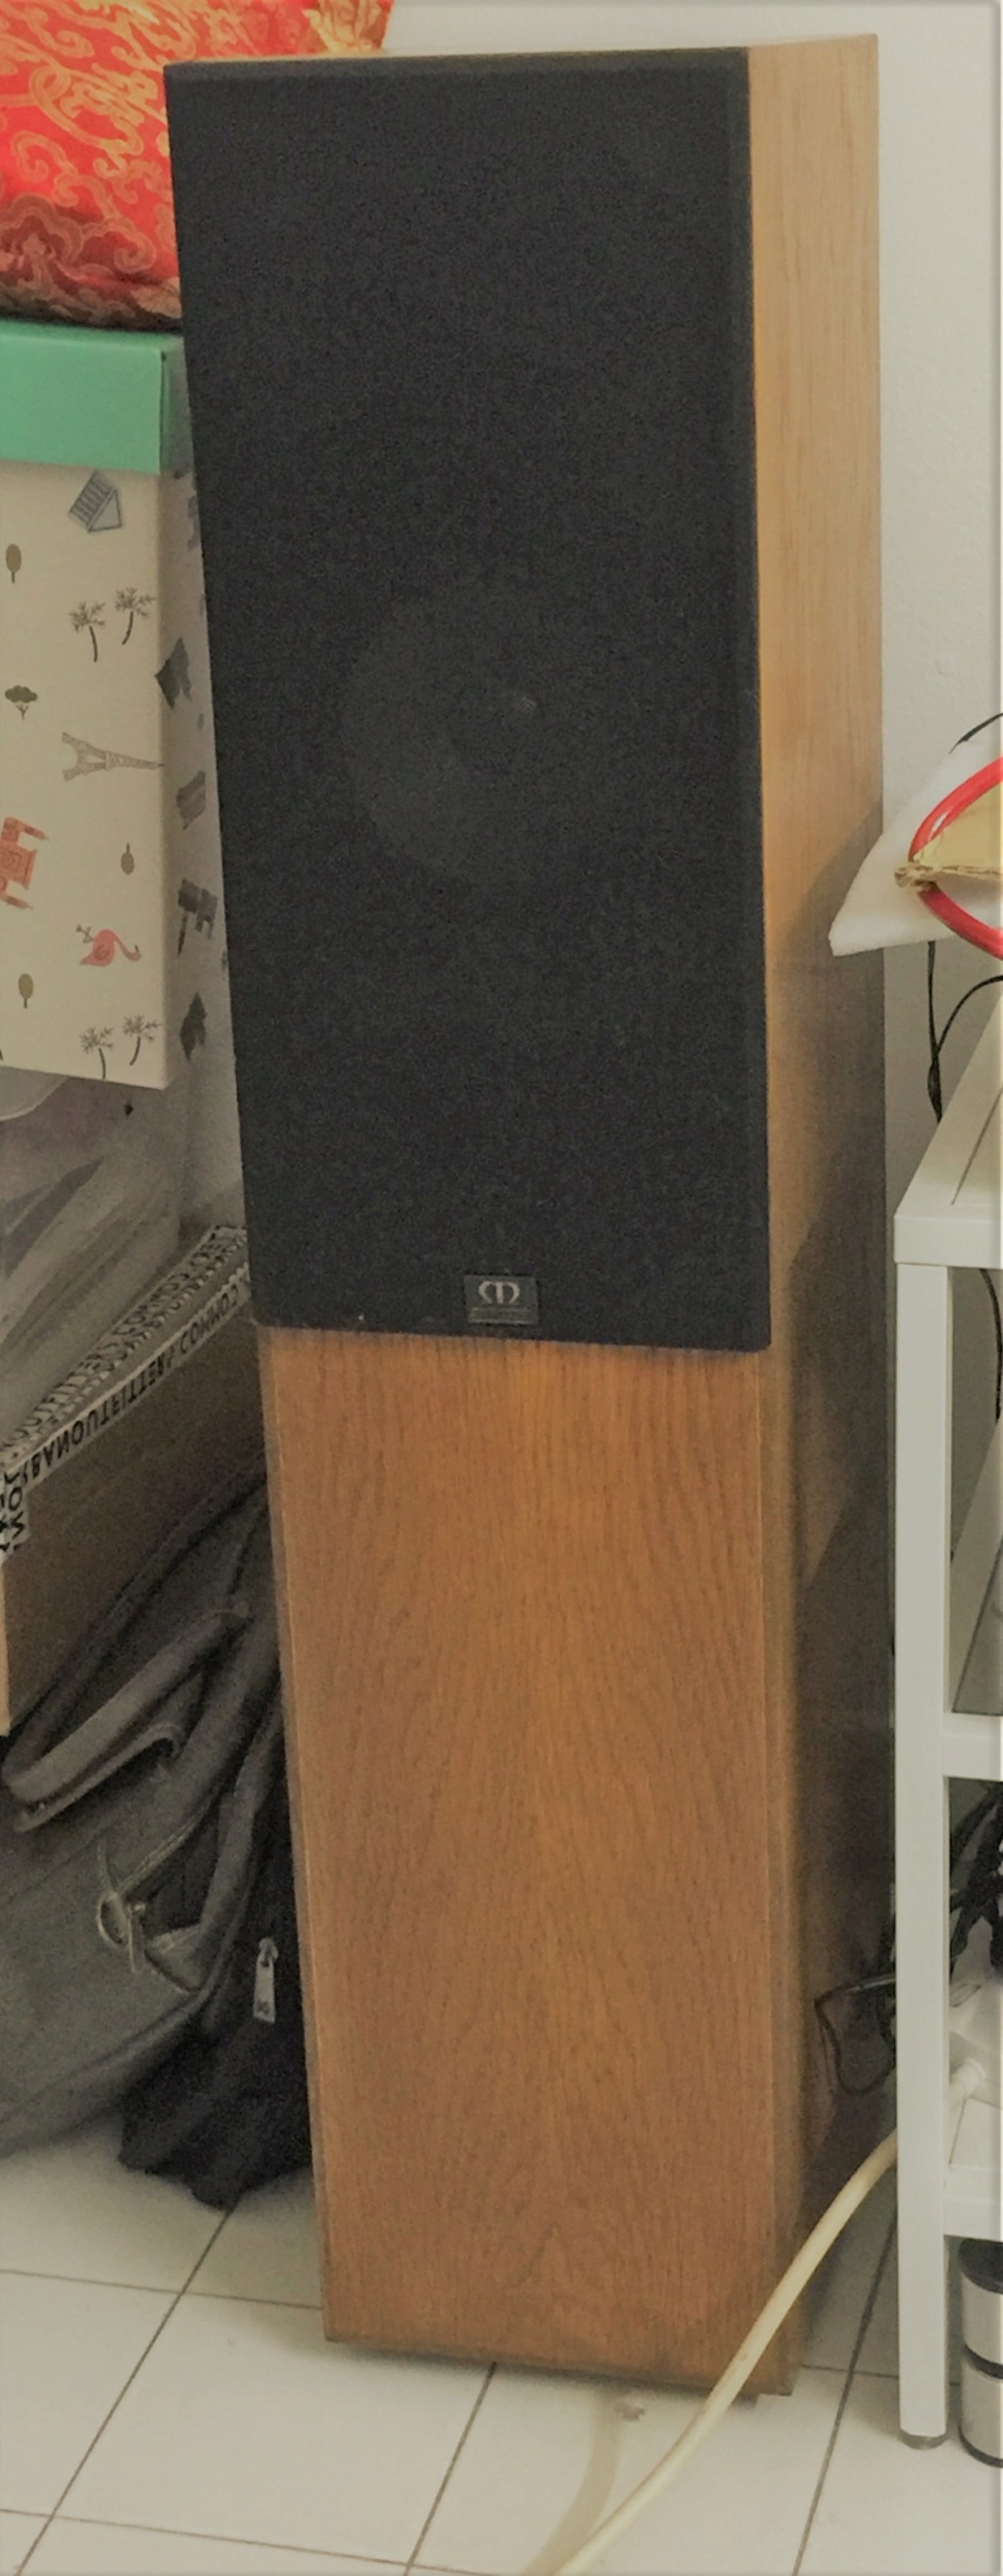 Monitor Audio studio 20 speakers-Made In England (sold) 517